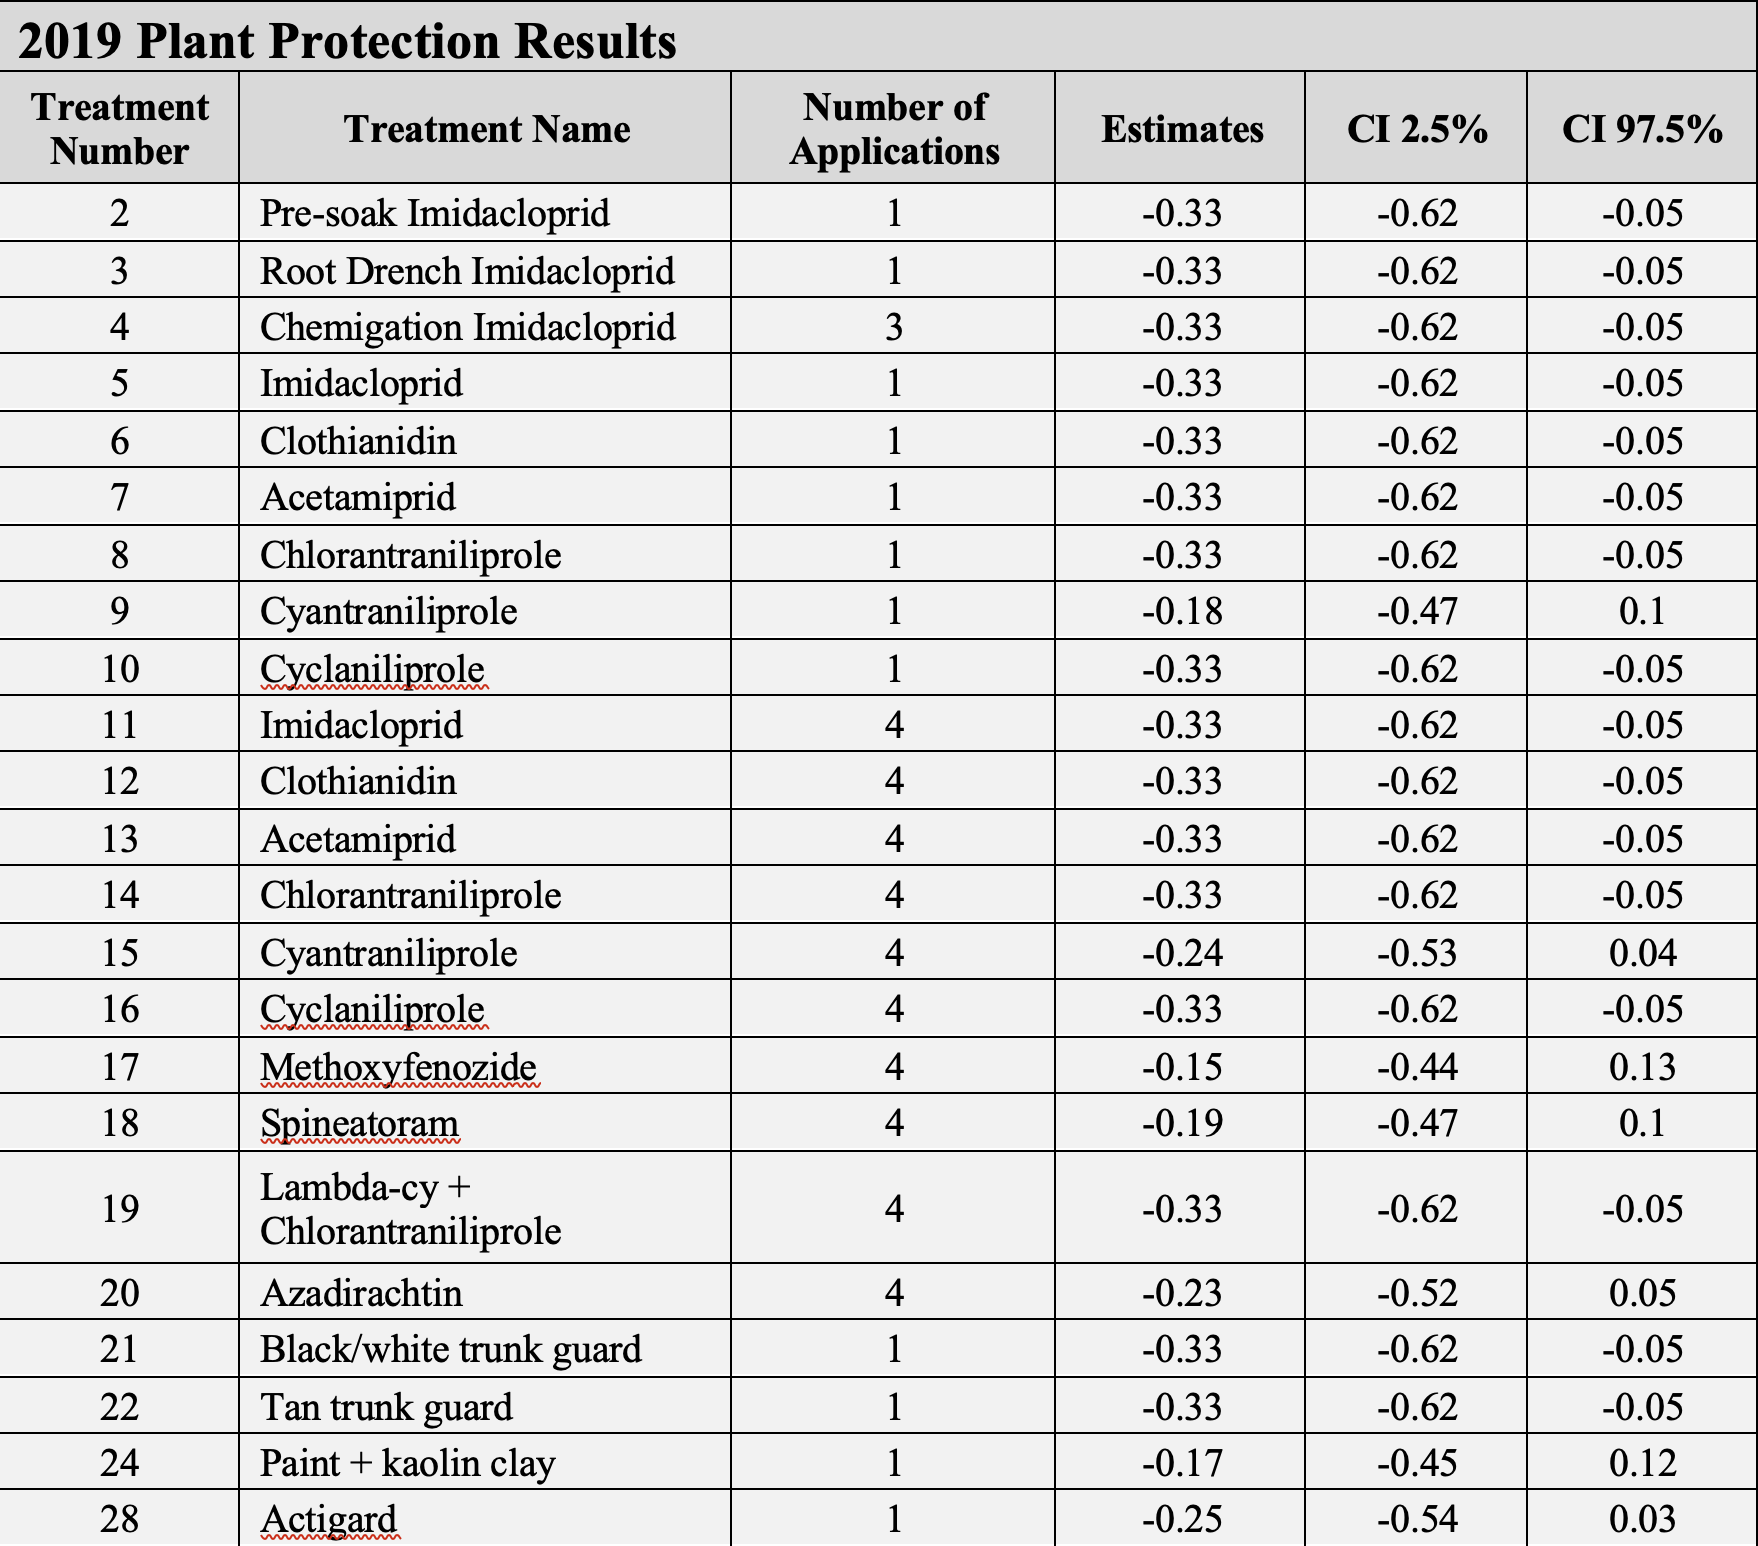 Plant protection results 2019 Plant protection results per treatment illustrating the average percentage decrease (Estimates) in borer damage total with respect to the control.